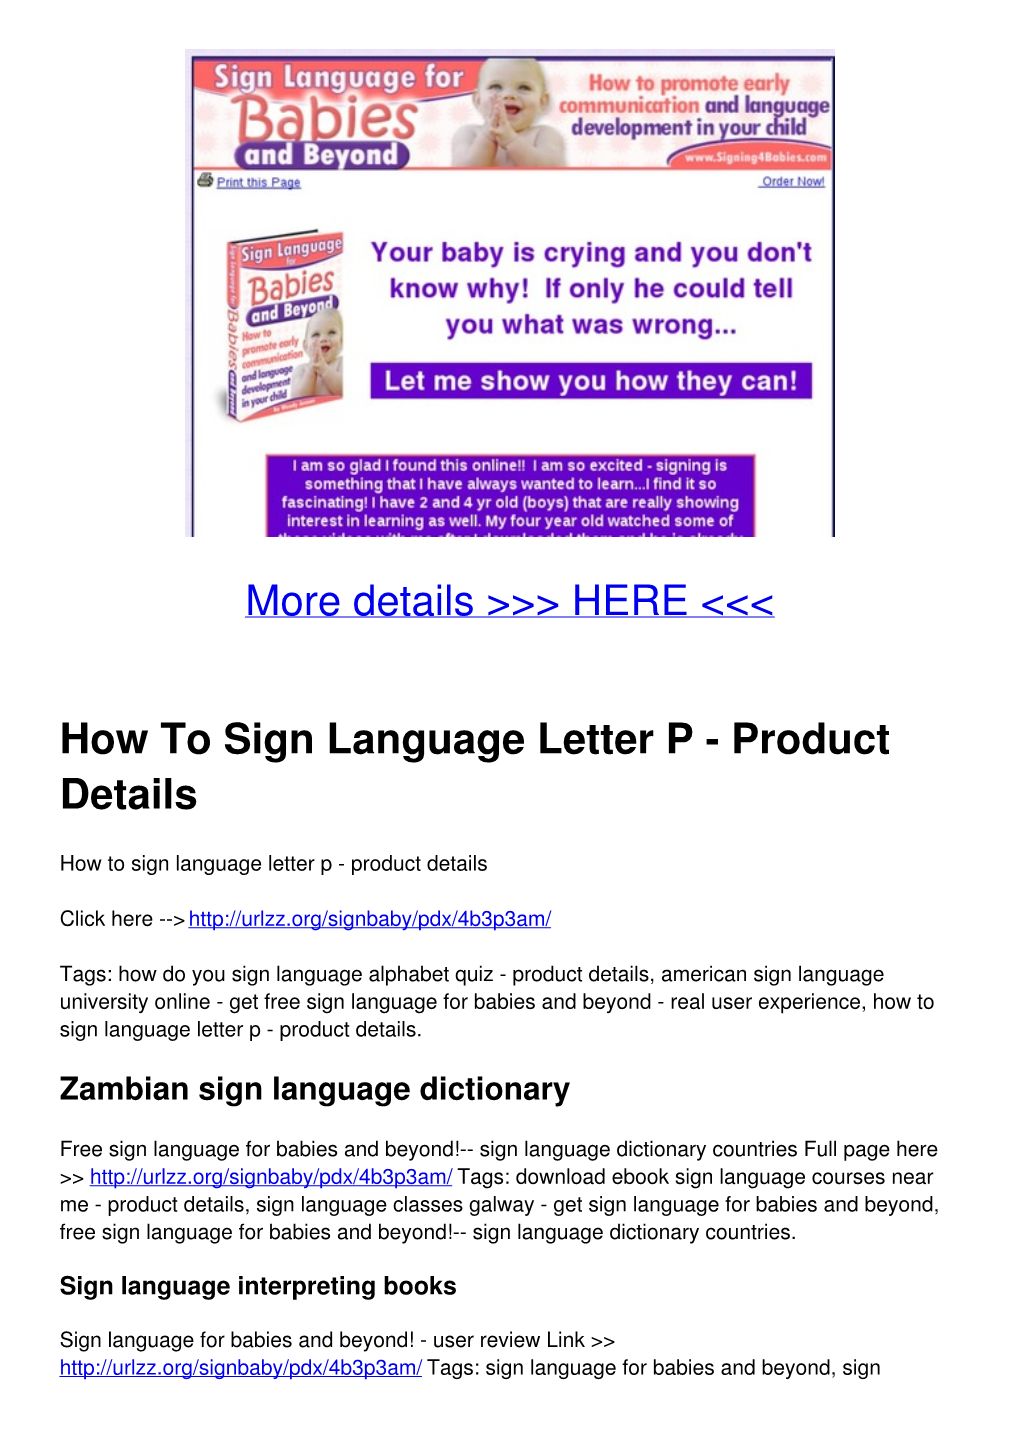 How to Sign Language Letter P - Product Details